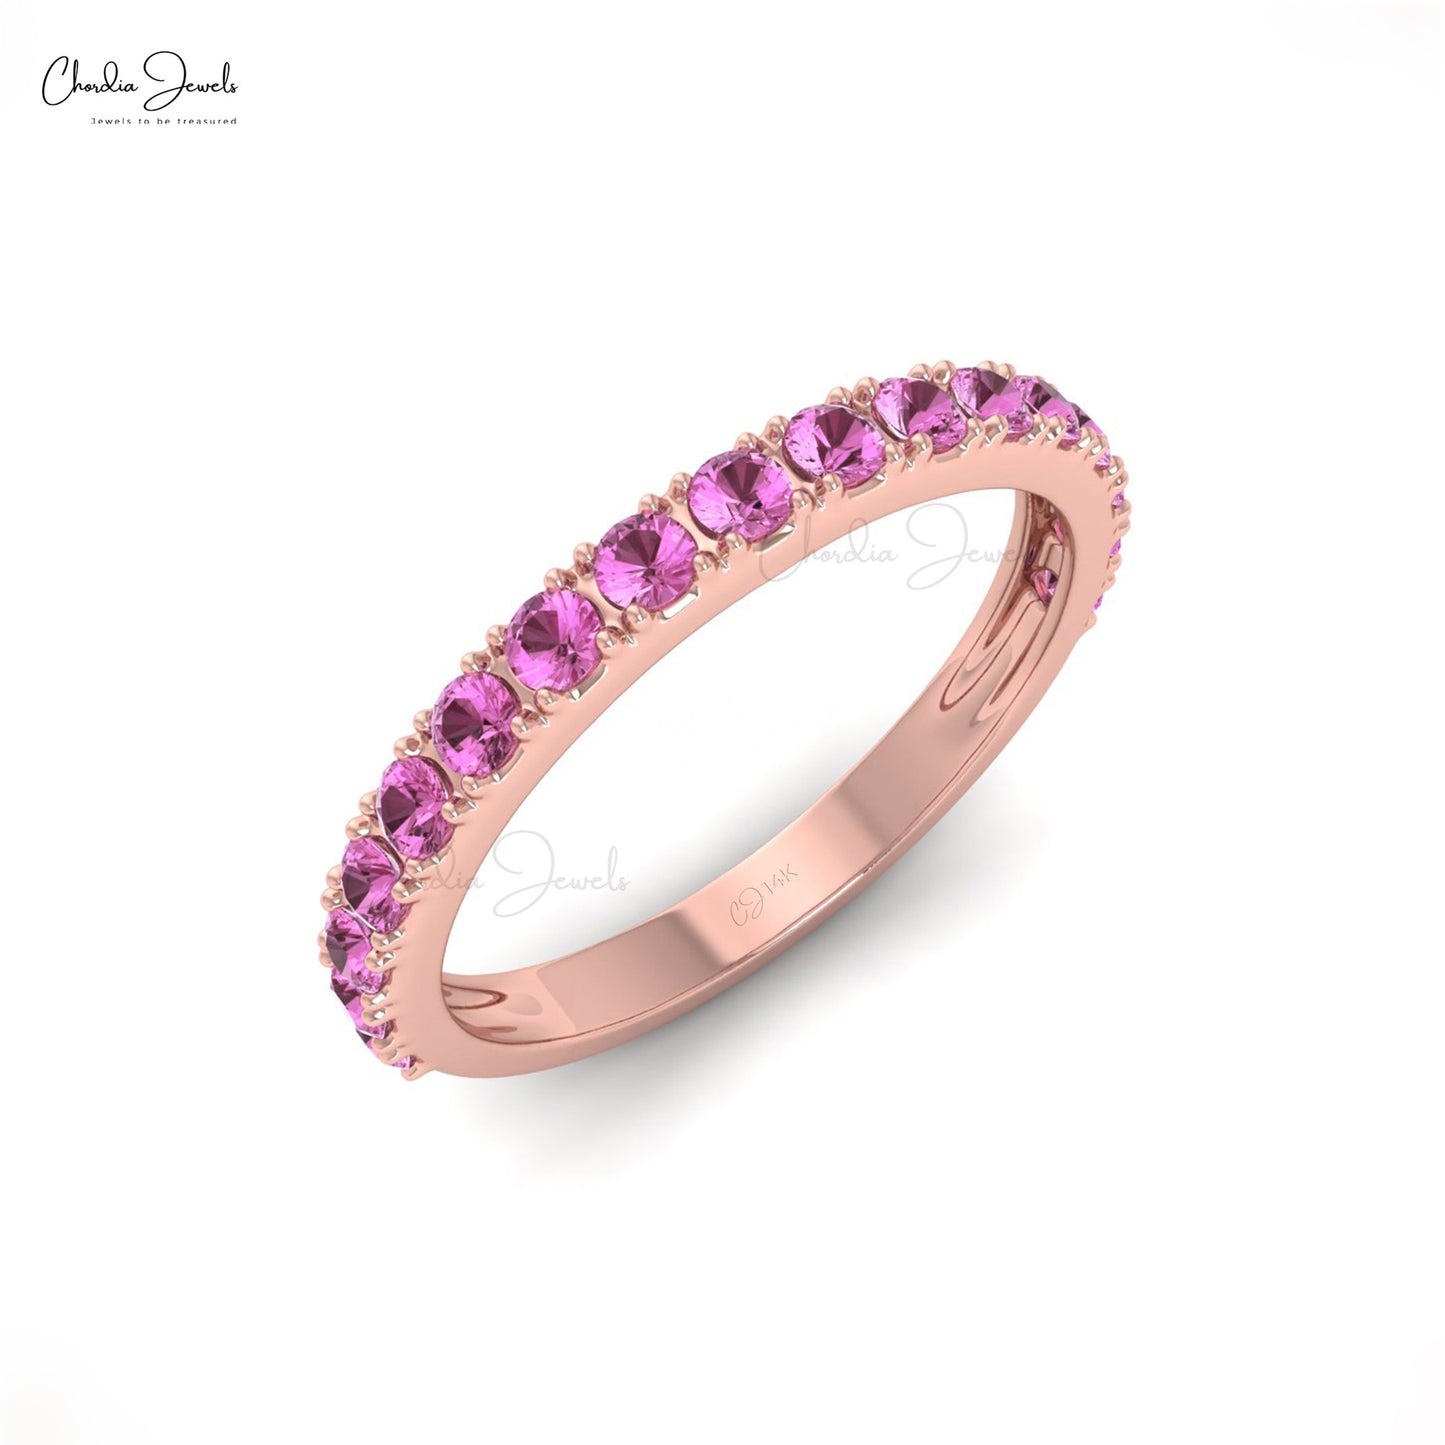 2 Row Women Wedding Diamond Band With Pink Sapphire In 14K Rose Gold